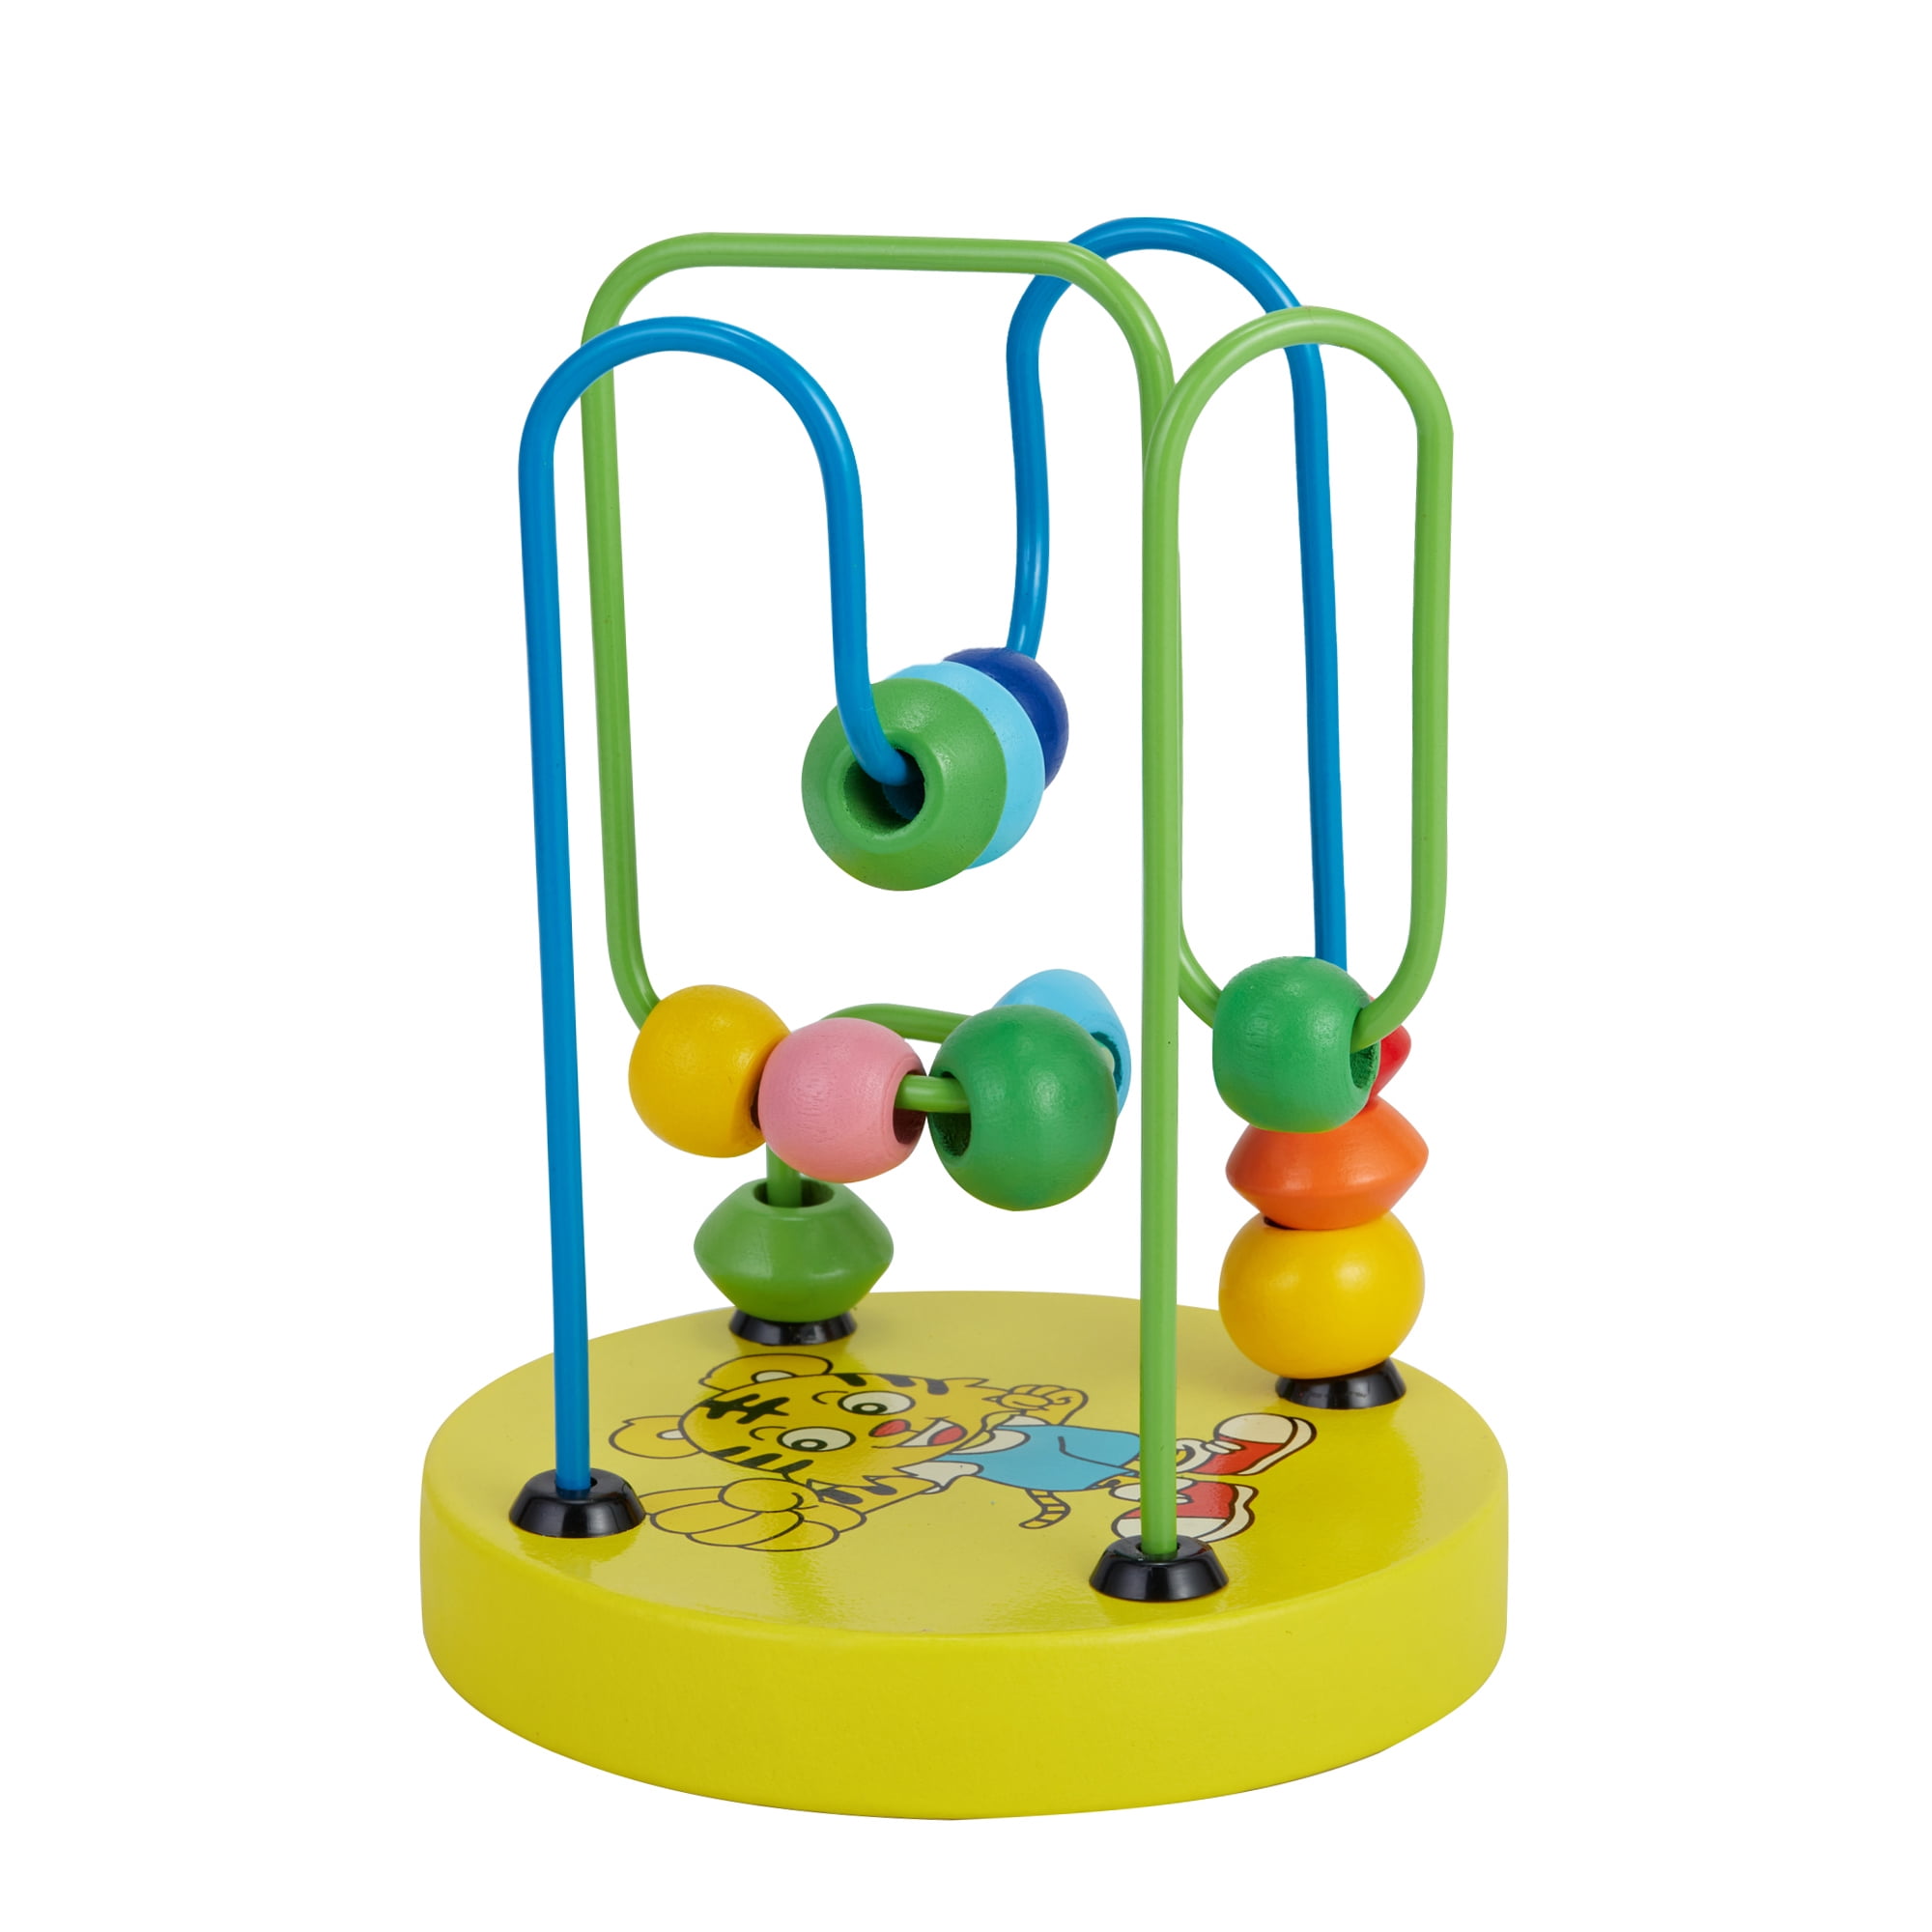 Kids Baby Wooden Mini Around Beads Wire Maze Outdoor Education Toys 8C 